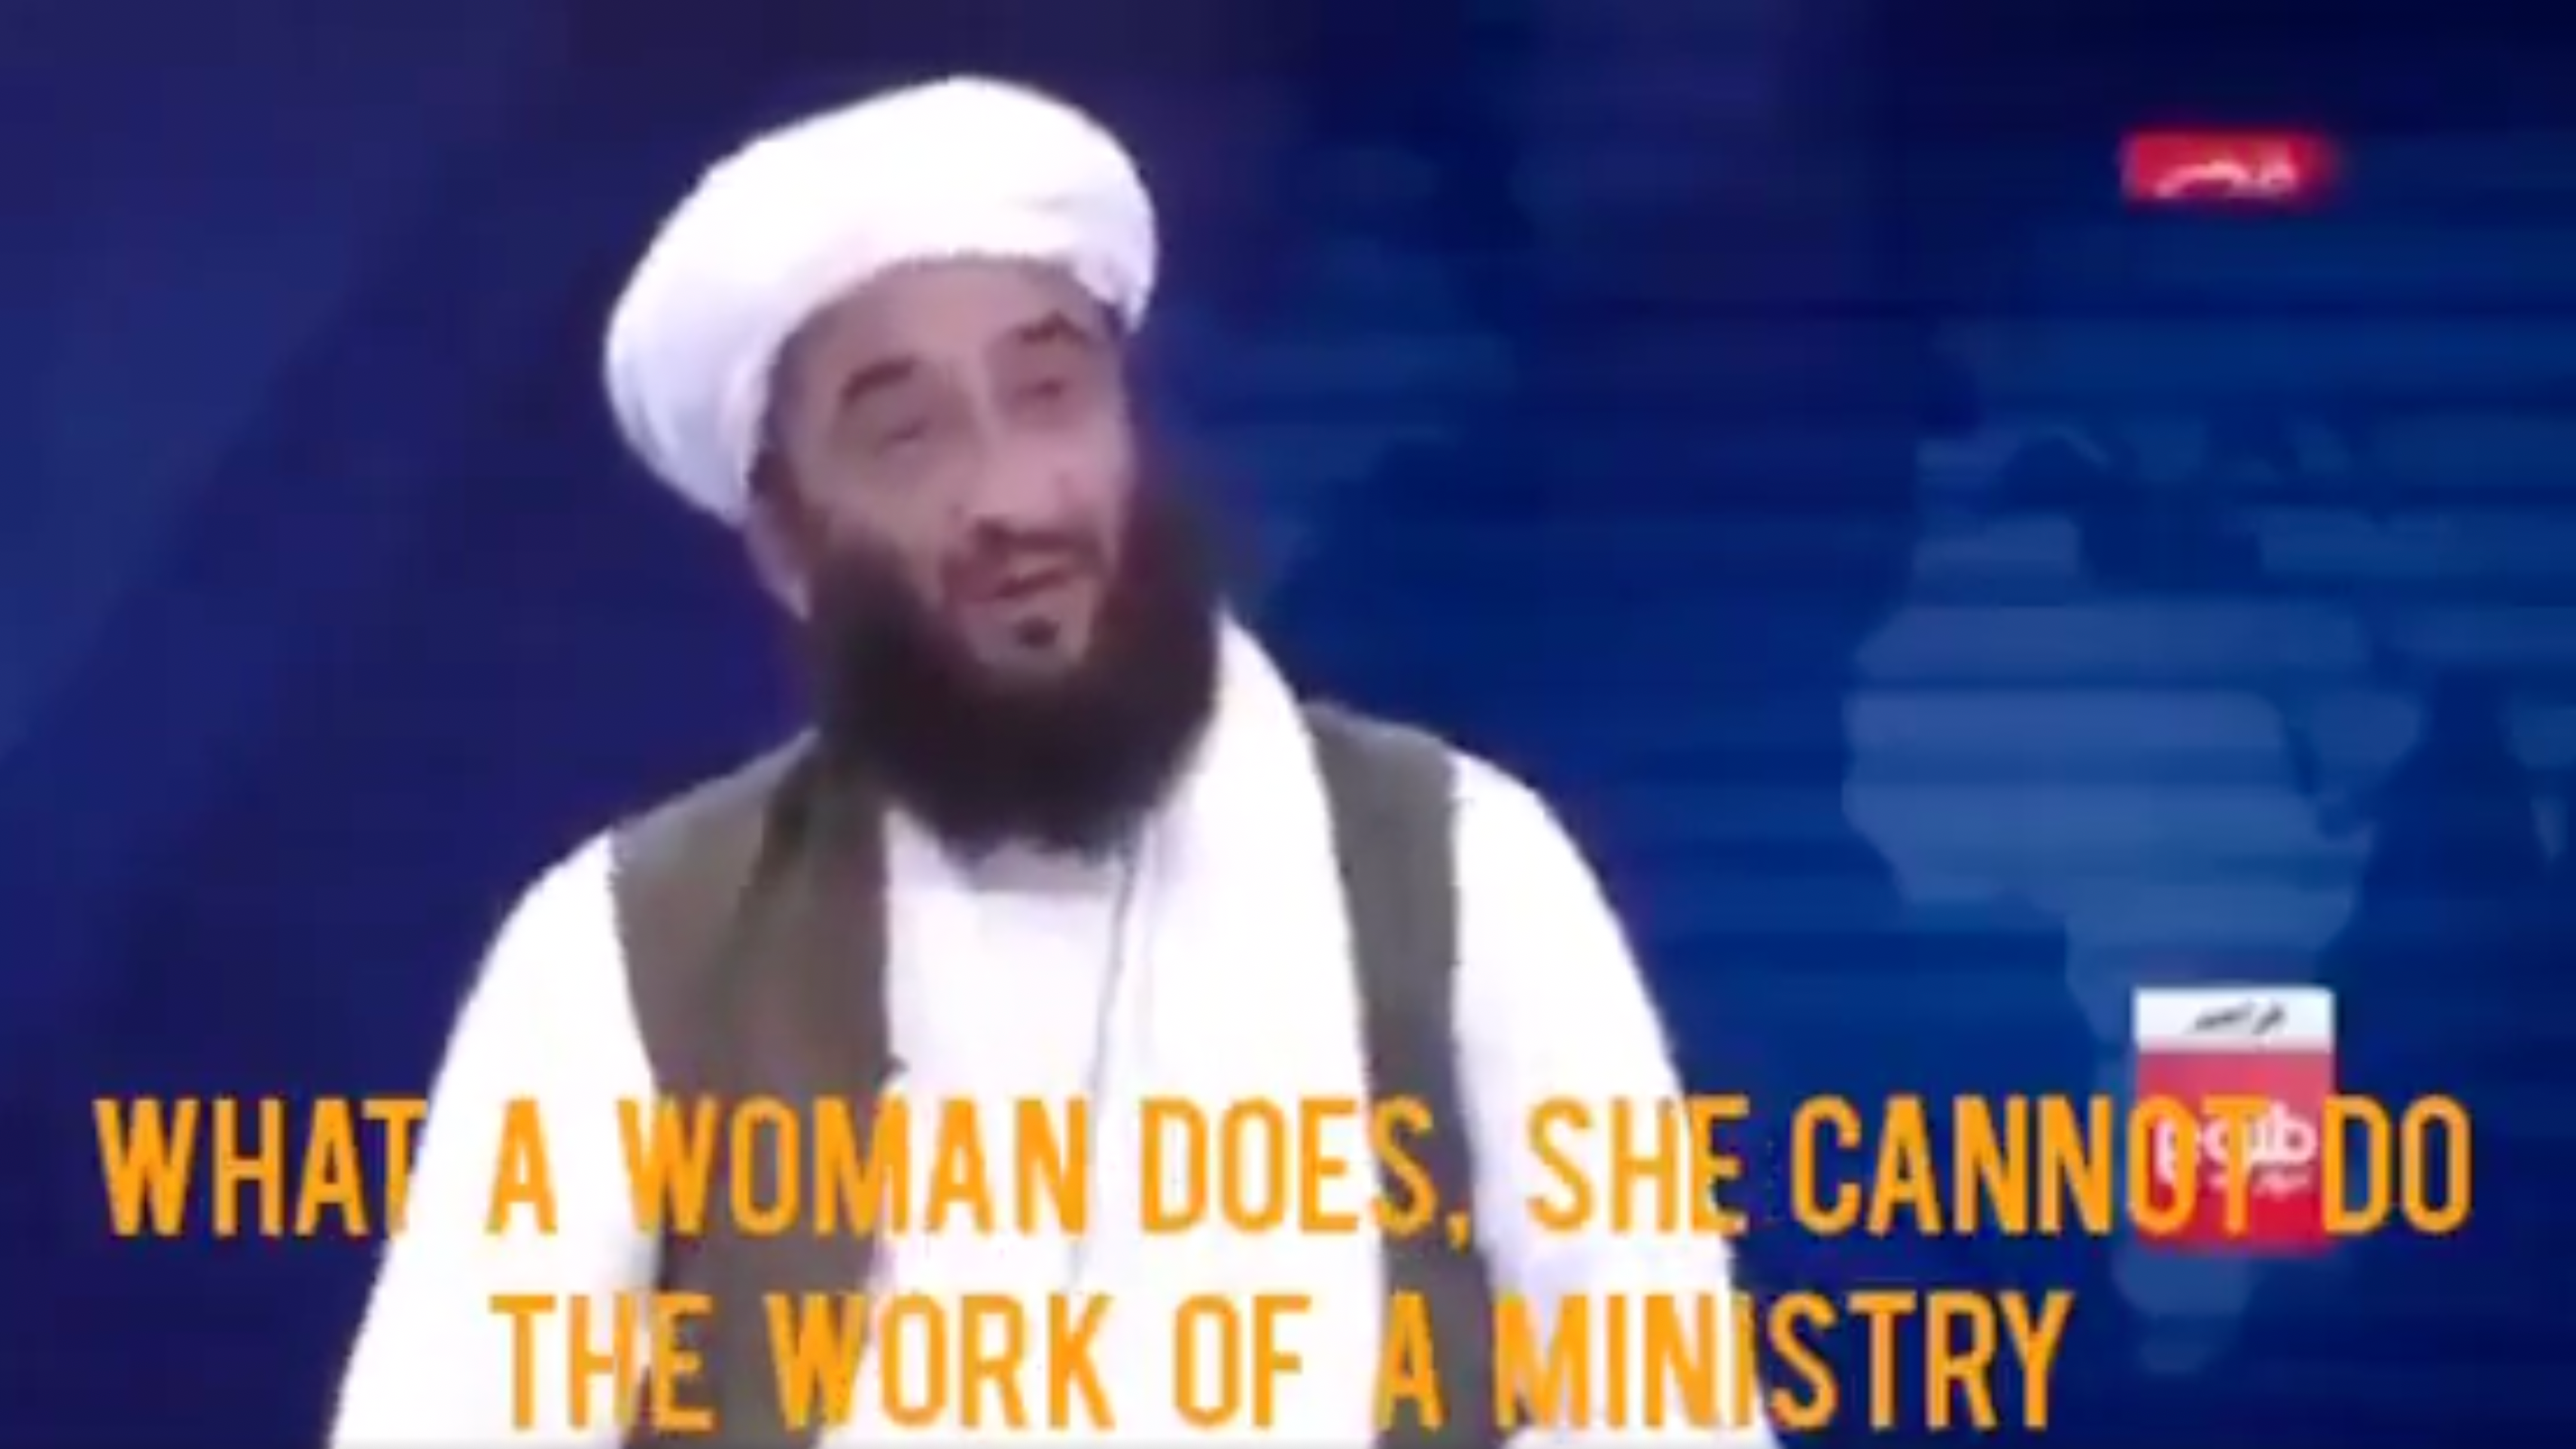 Sayed Zekrullah Hashimi went on Afghan TV to claim that it was not necessary for women to serve in the Taliban’s government